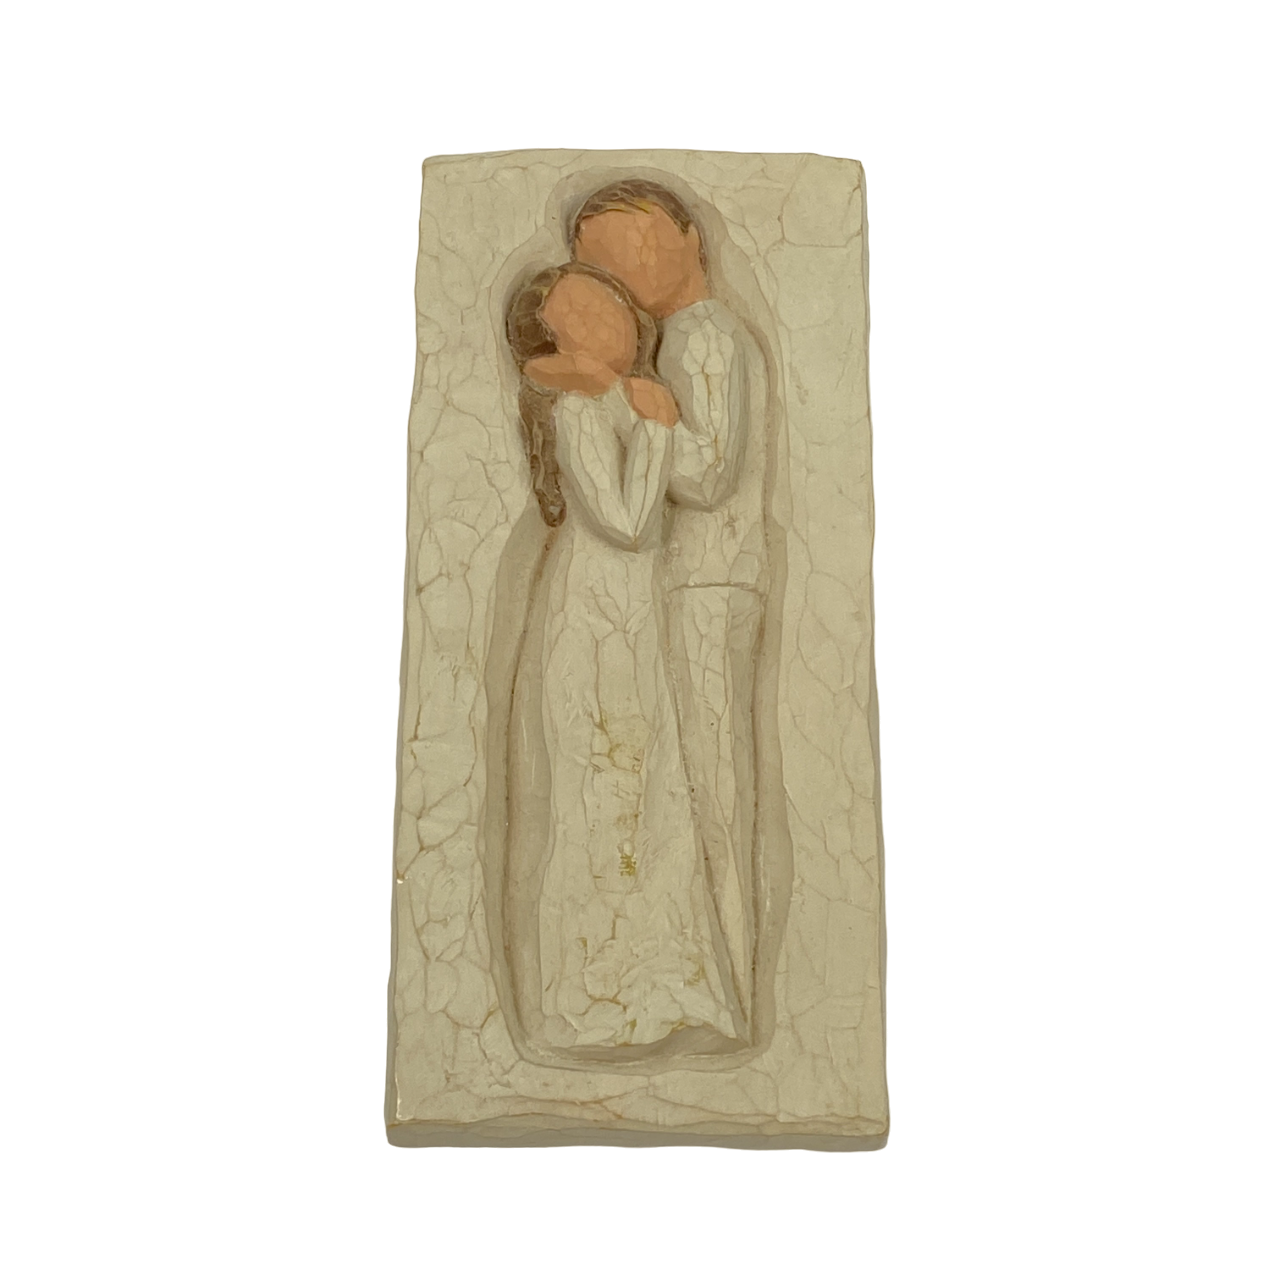 Primary image for Willow Tree In Loves Embrace Demdaco Susan Lordi Wall Plaque Figurine 2002